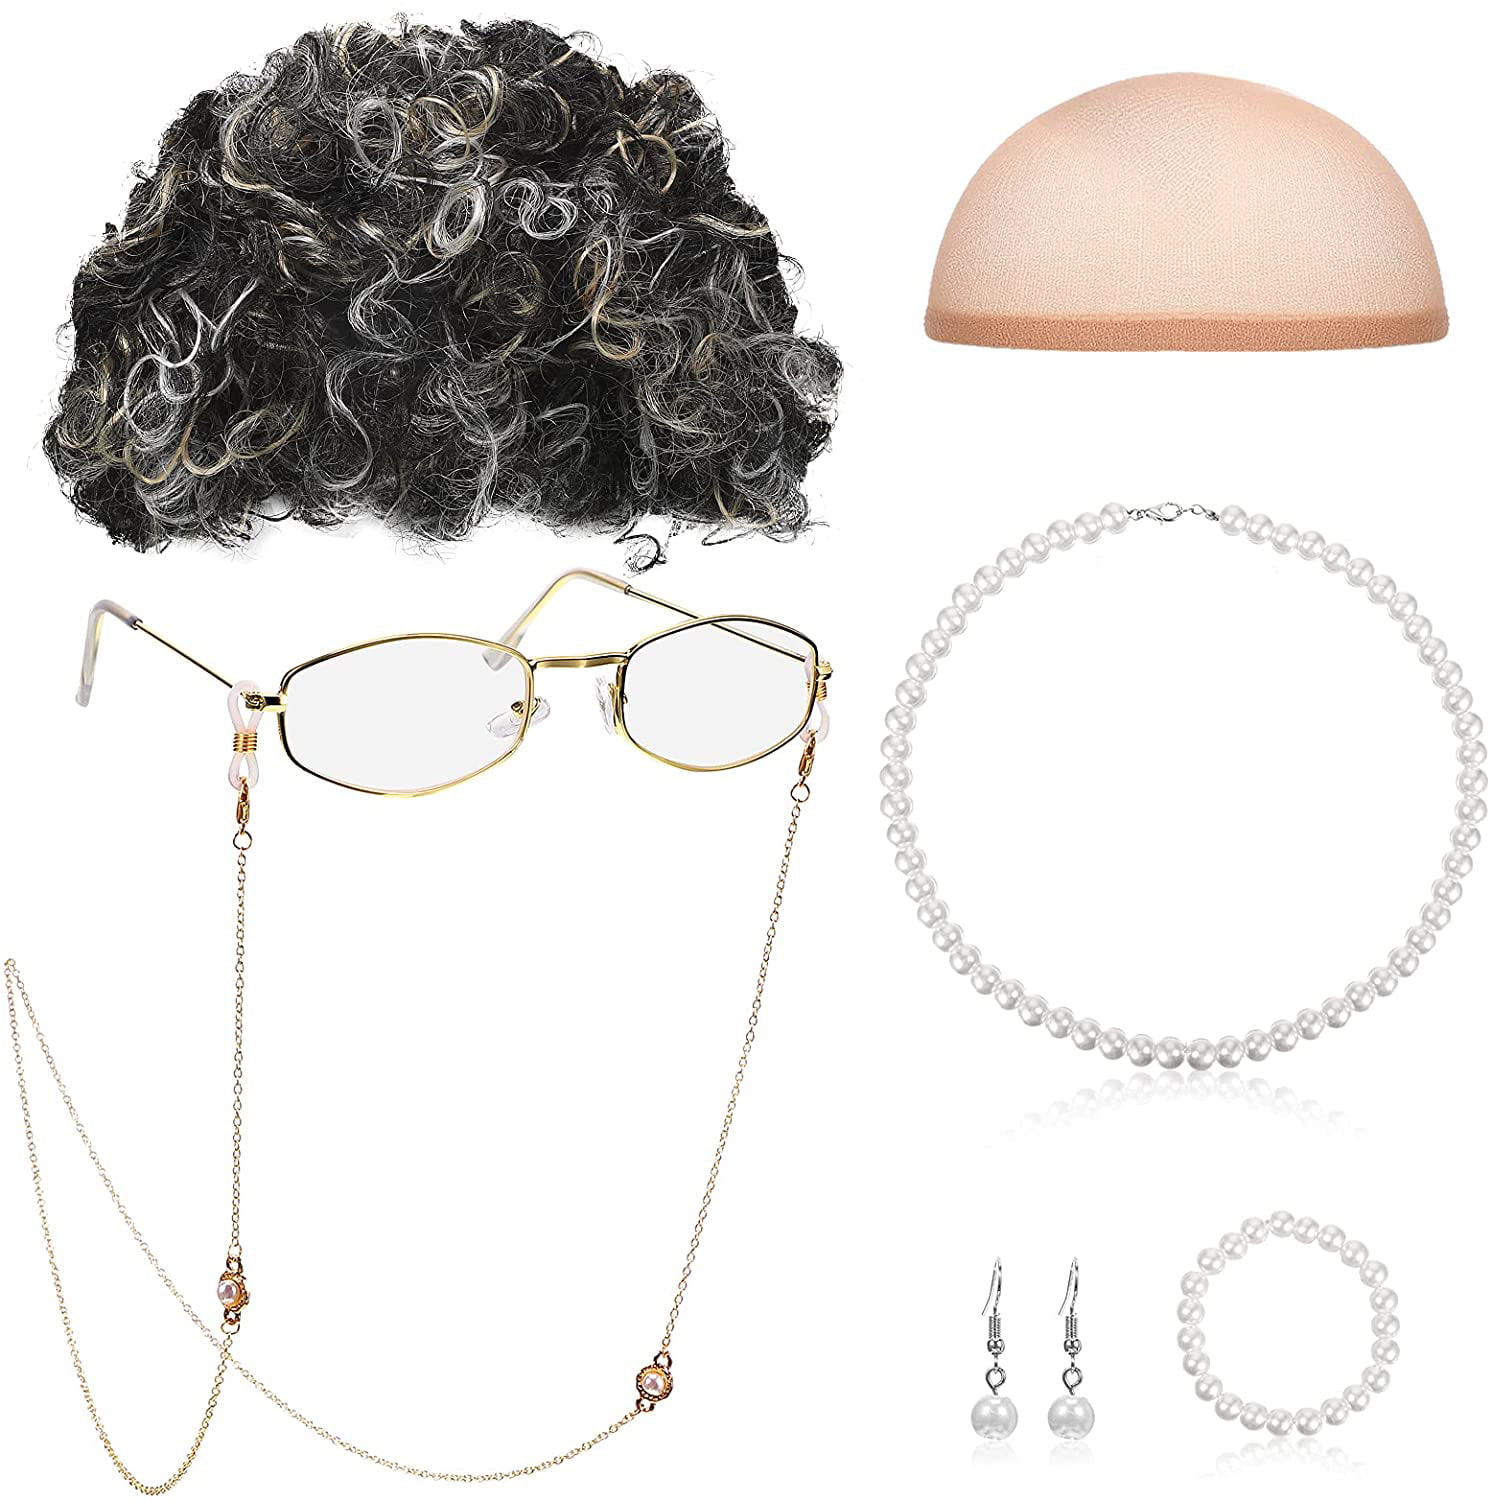 Old Lady Cosplay Set Granny Wig Cap Glasses Chain Cords Faux Pearl Bead Necklace 